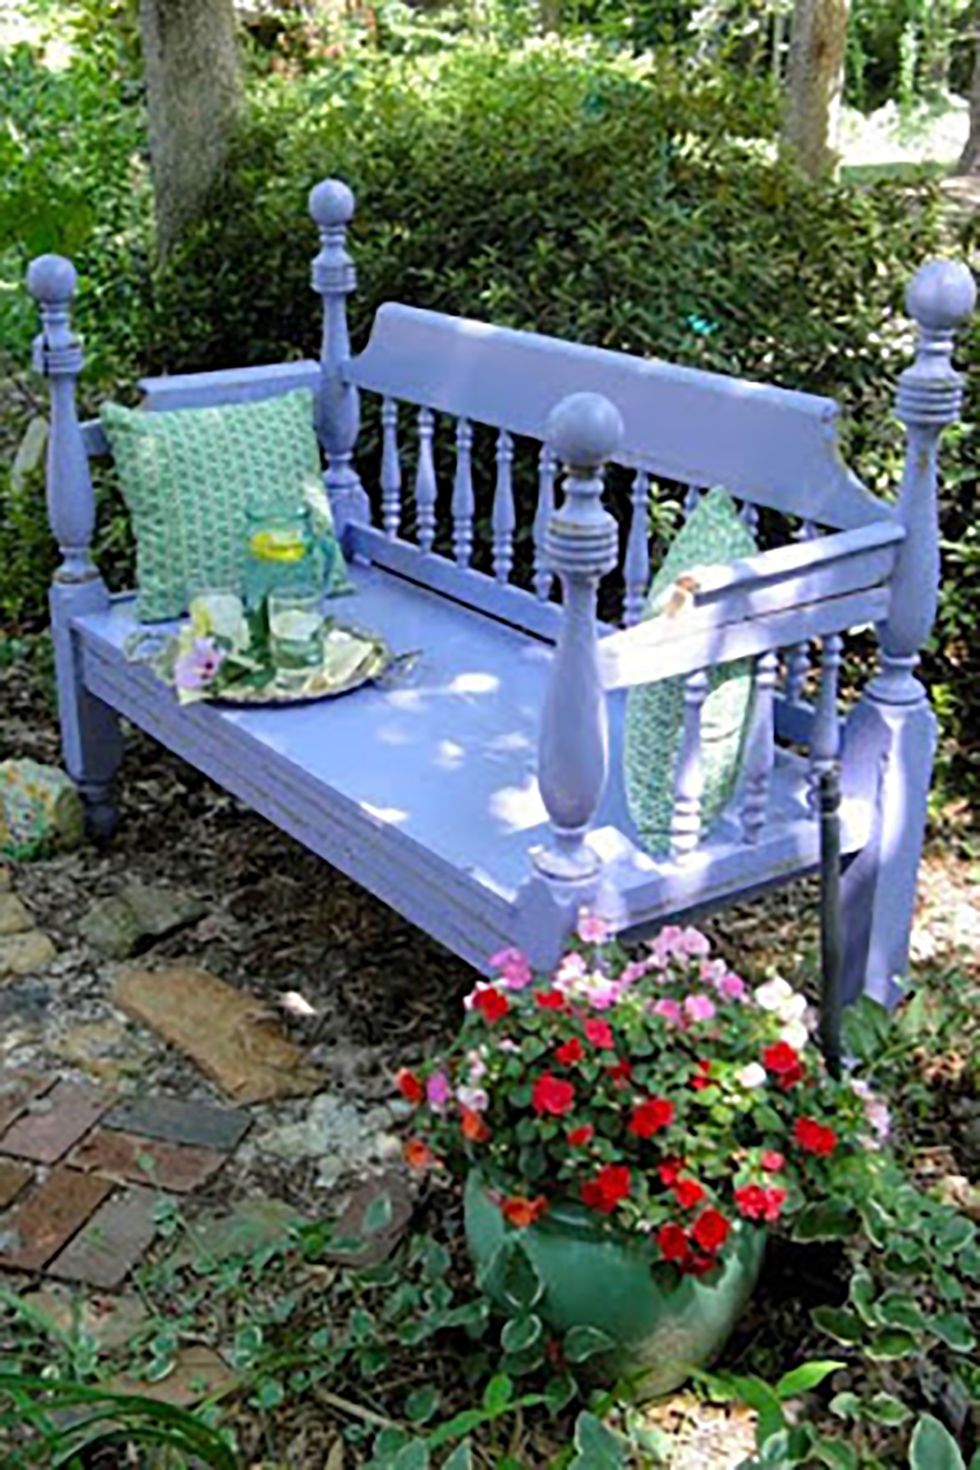 Simple DIY Outdoor Bench - Home Improvement Projects to inspire